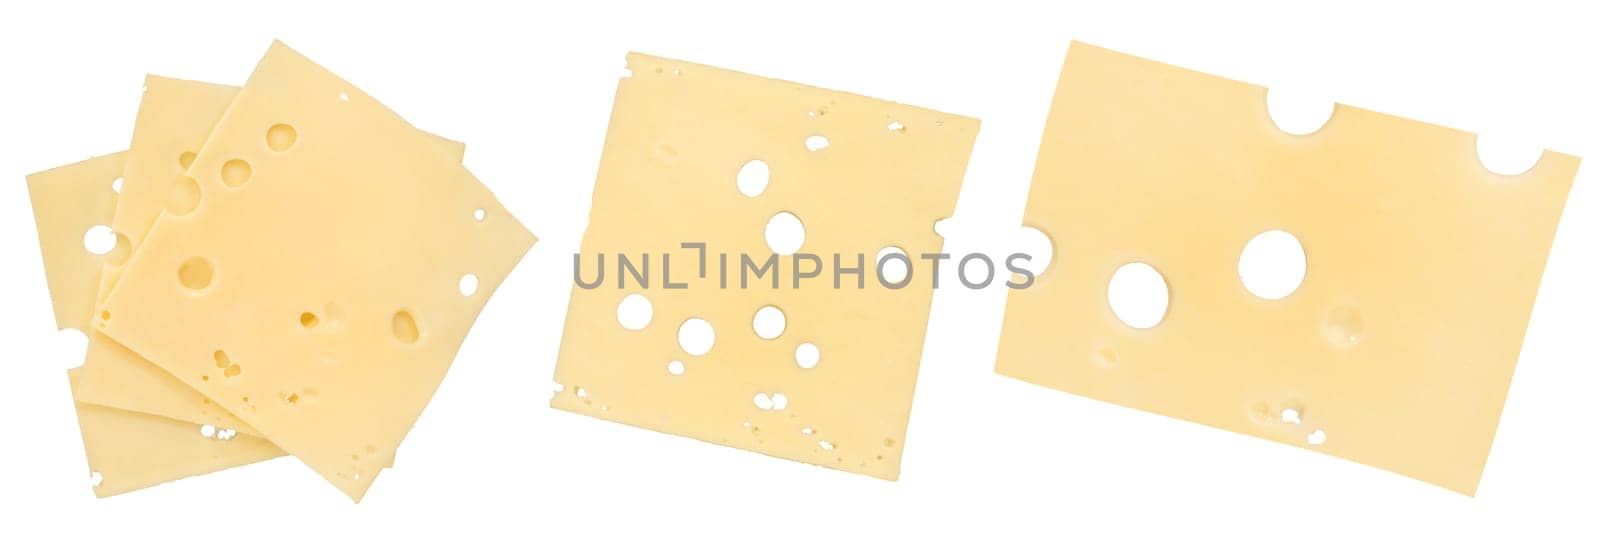 Emmental cheese isolate. Cheese slices with big holes close-up. Emmental cheese is cut into thin slices of different shapes, isolated on a white background. by SERSOL